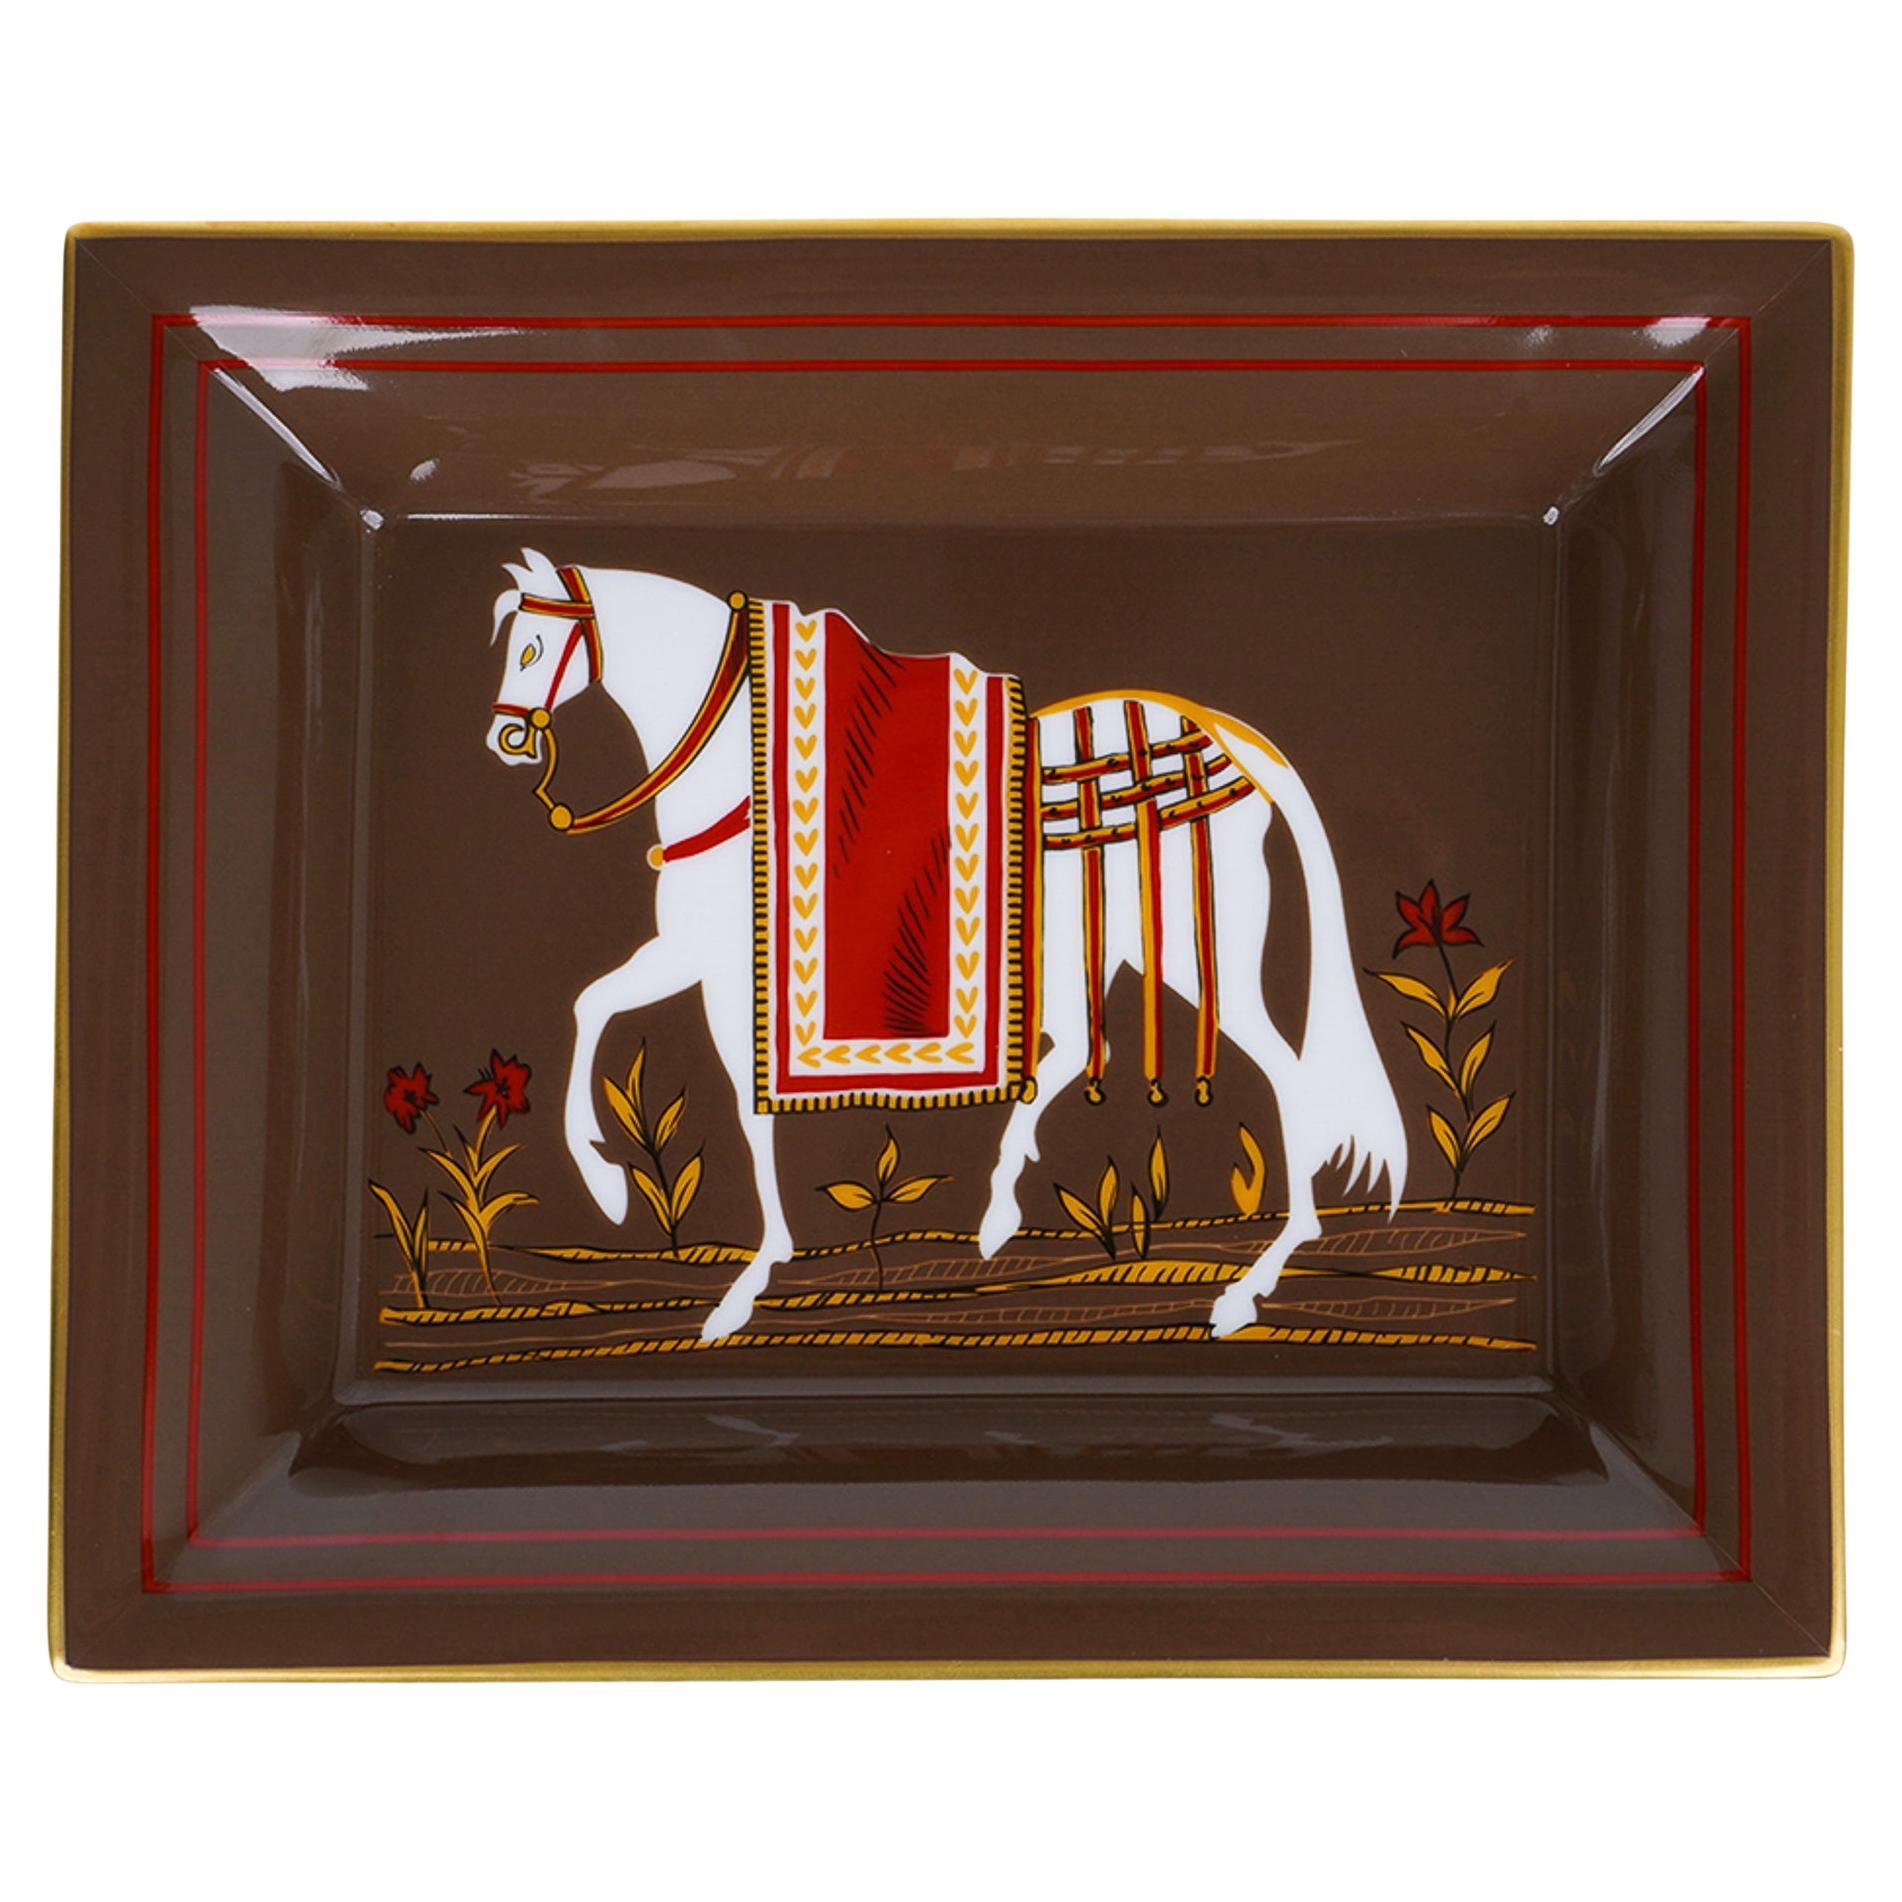 Hermes Equestrian Brown / White Limoges Porcelain Change Tray For Sale